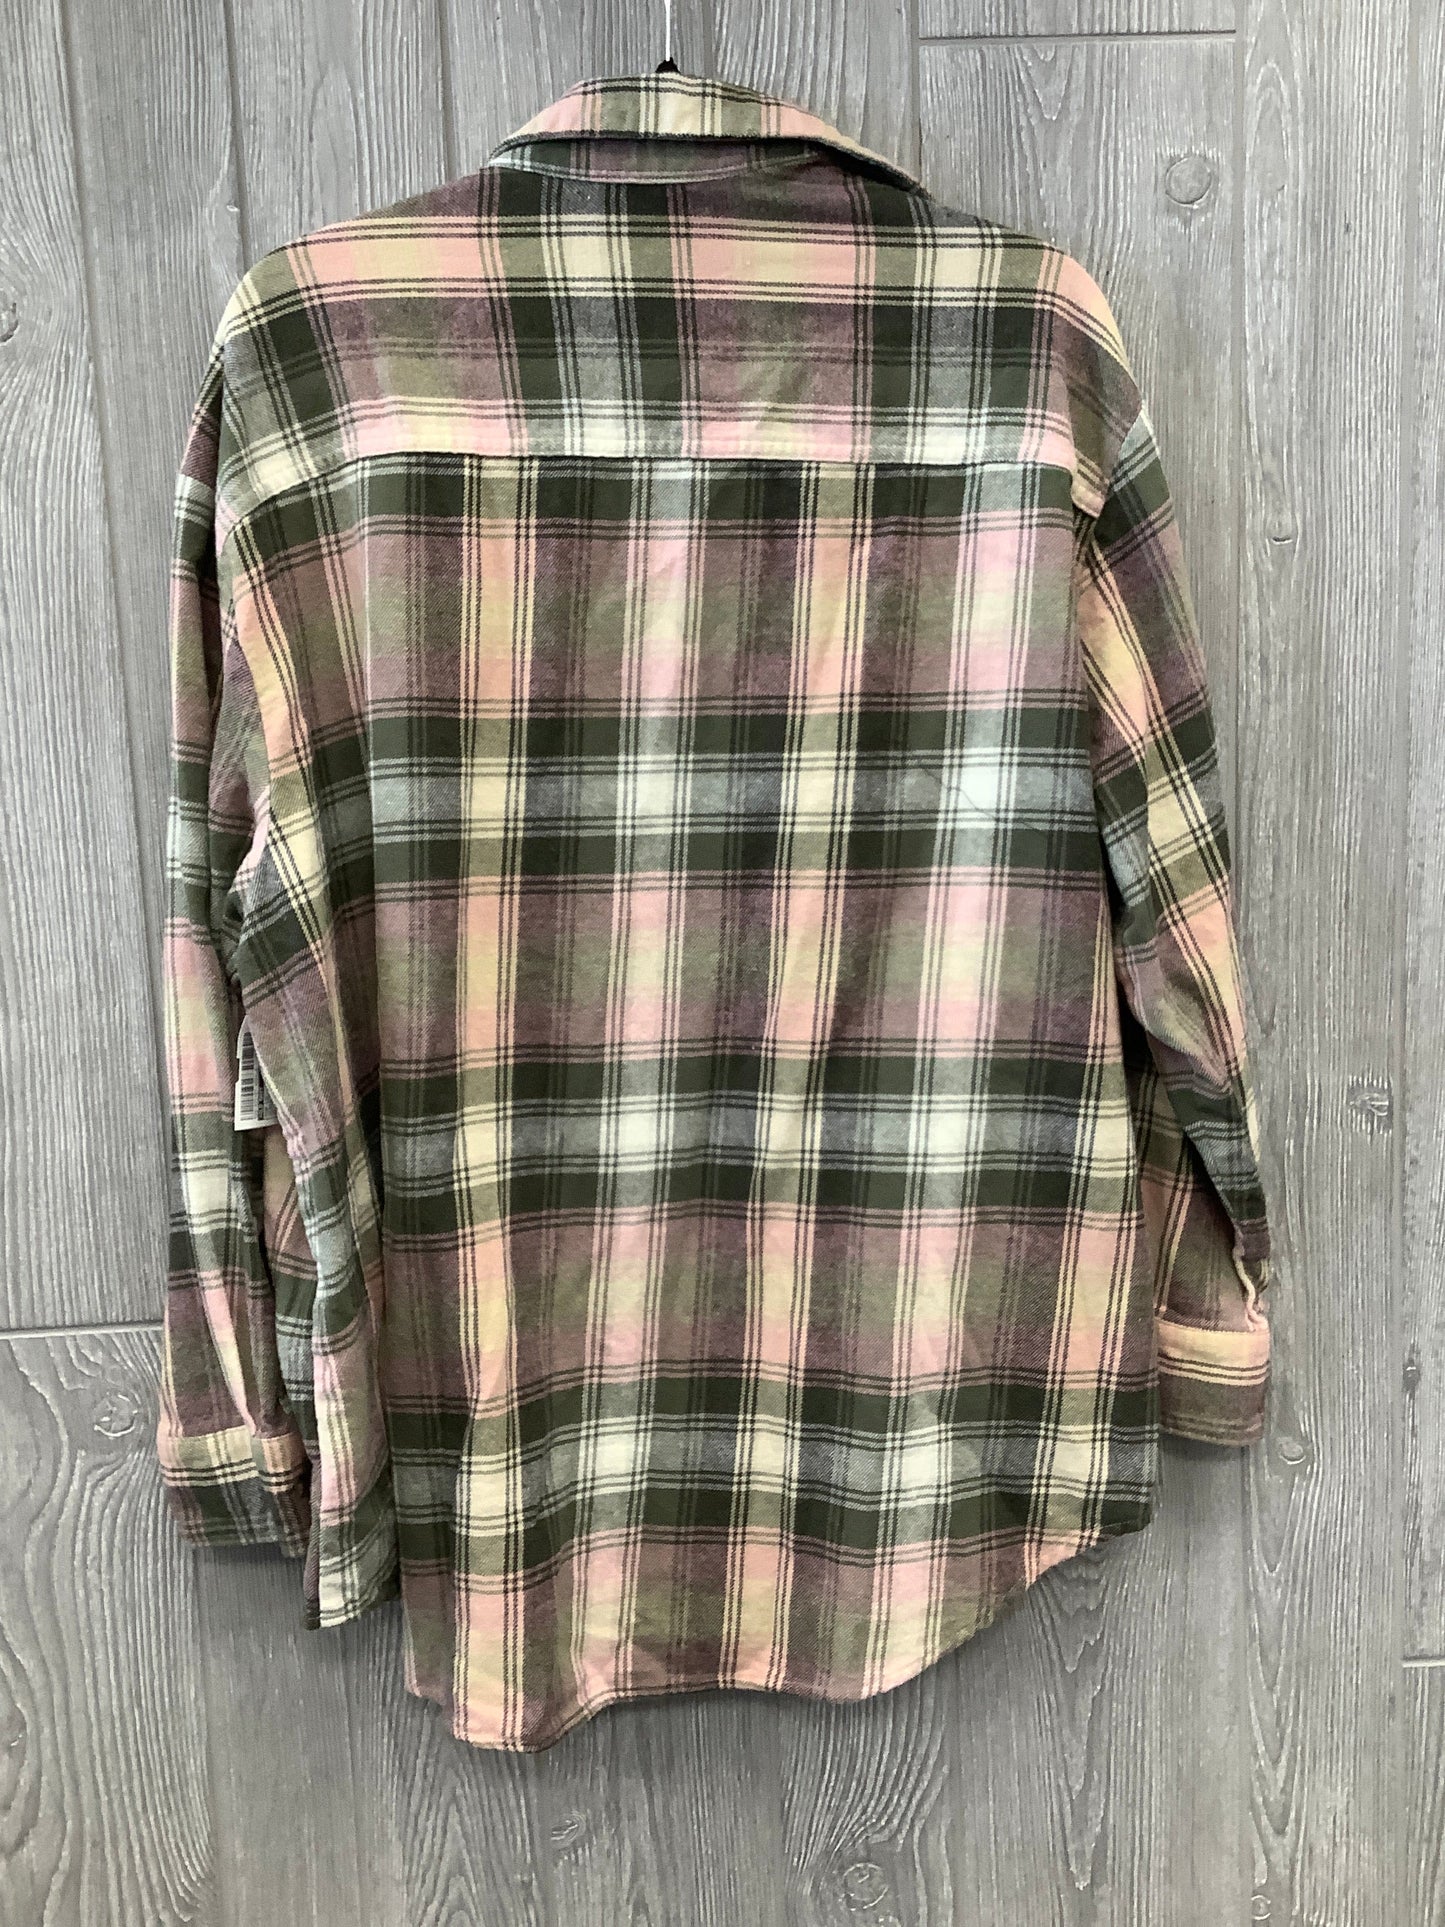 Plaid Pattern Top Long Sleeve Old Navy, Size Xl